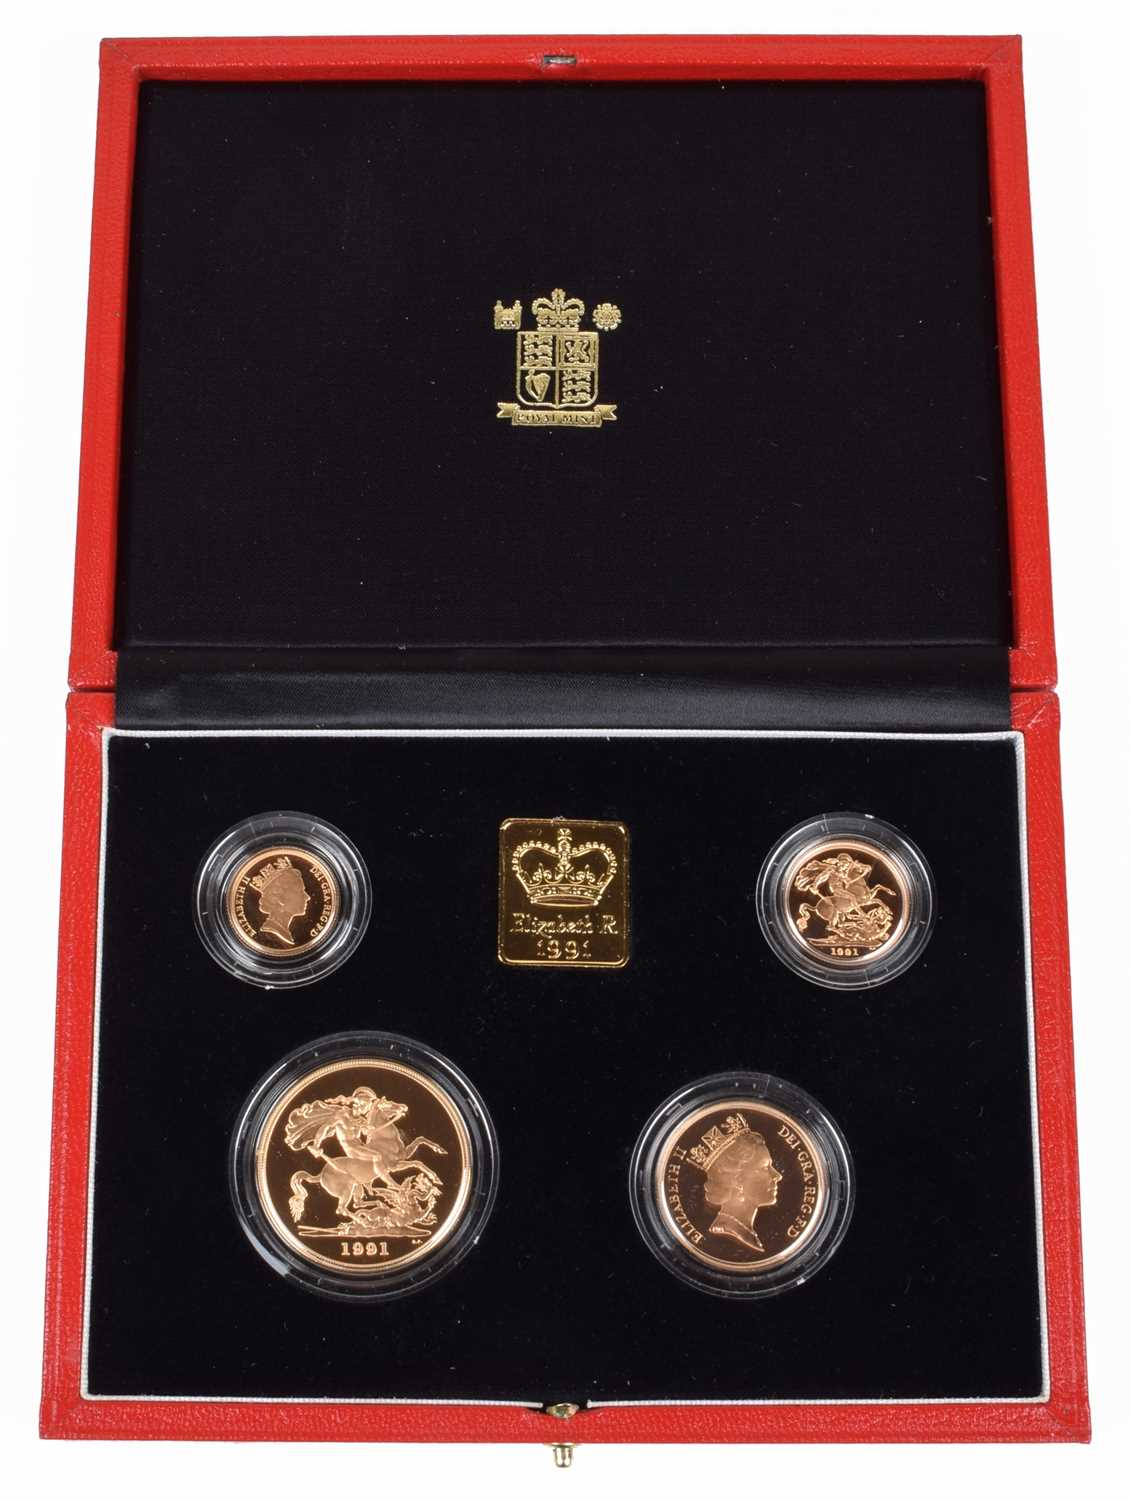 Lot 11 - Elizabeth II, United Kingdom, 1991, Gold Proof Four Coin Collection, Royal Mint.